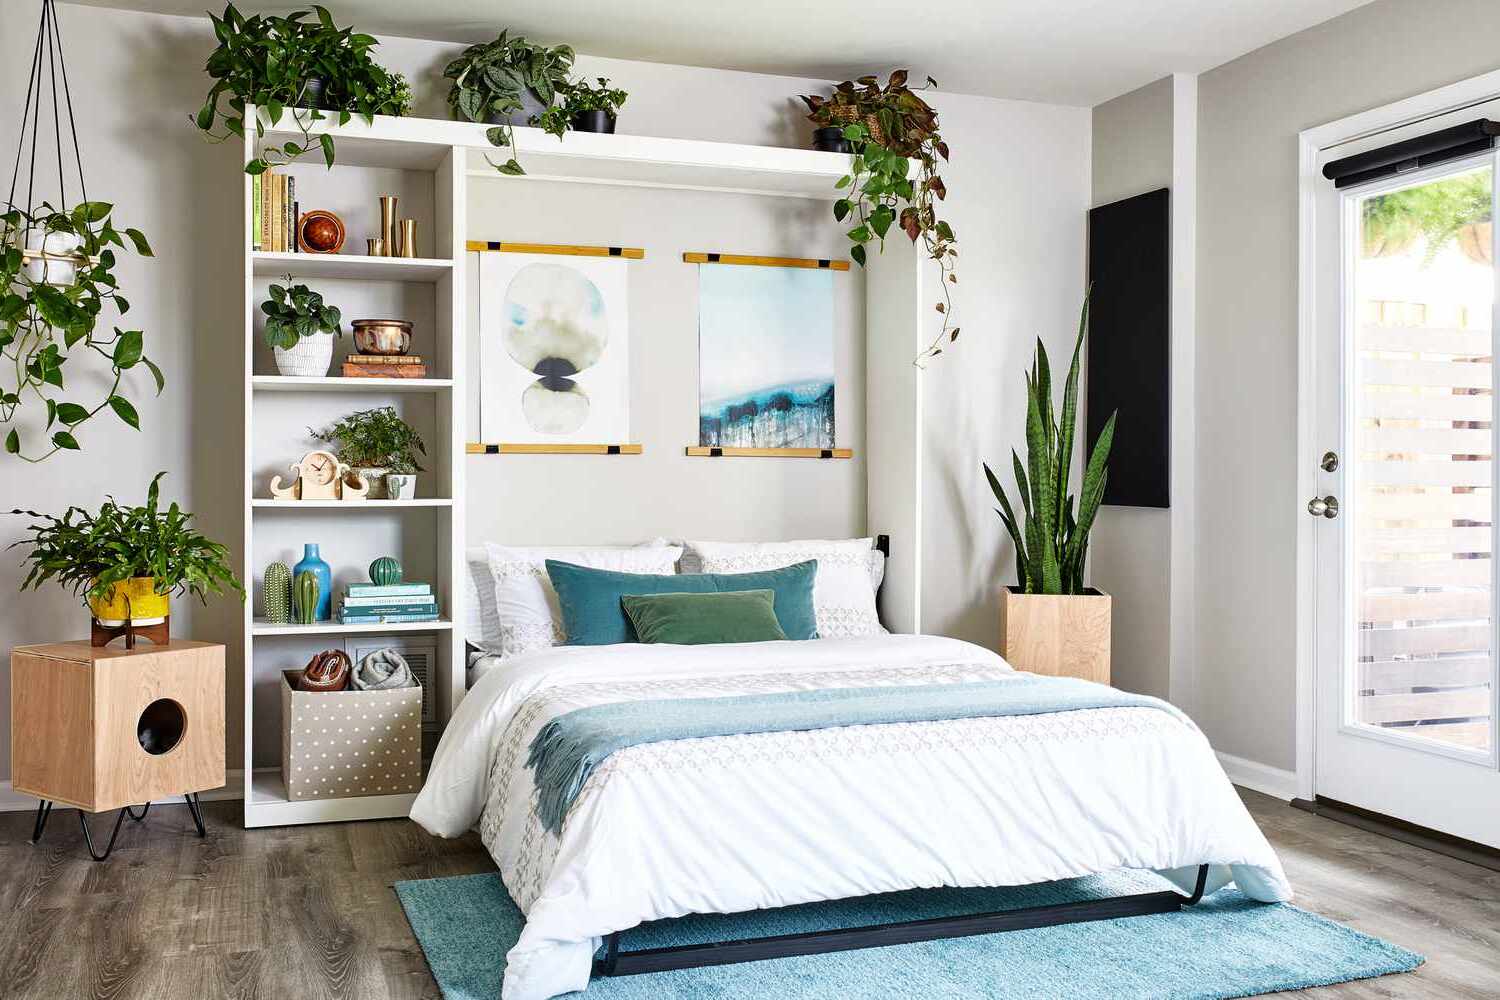 DIY Murphy Bed: Create Your Own Space-Saving Solution